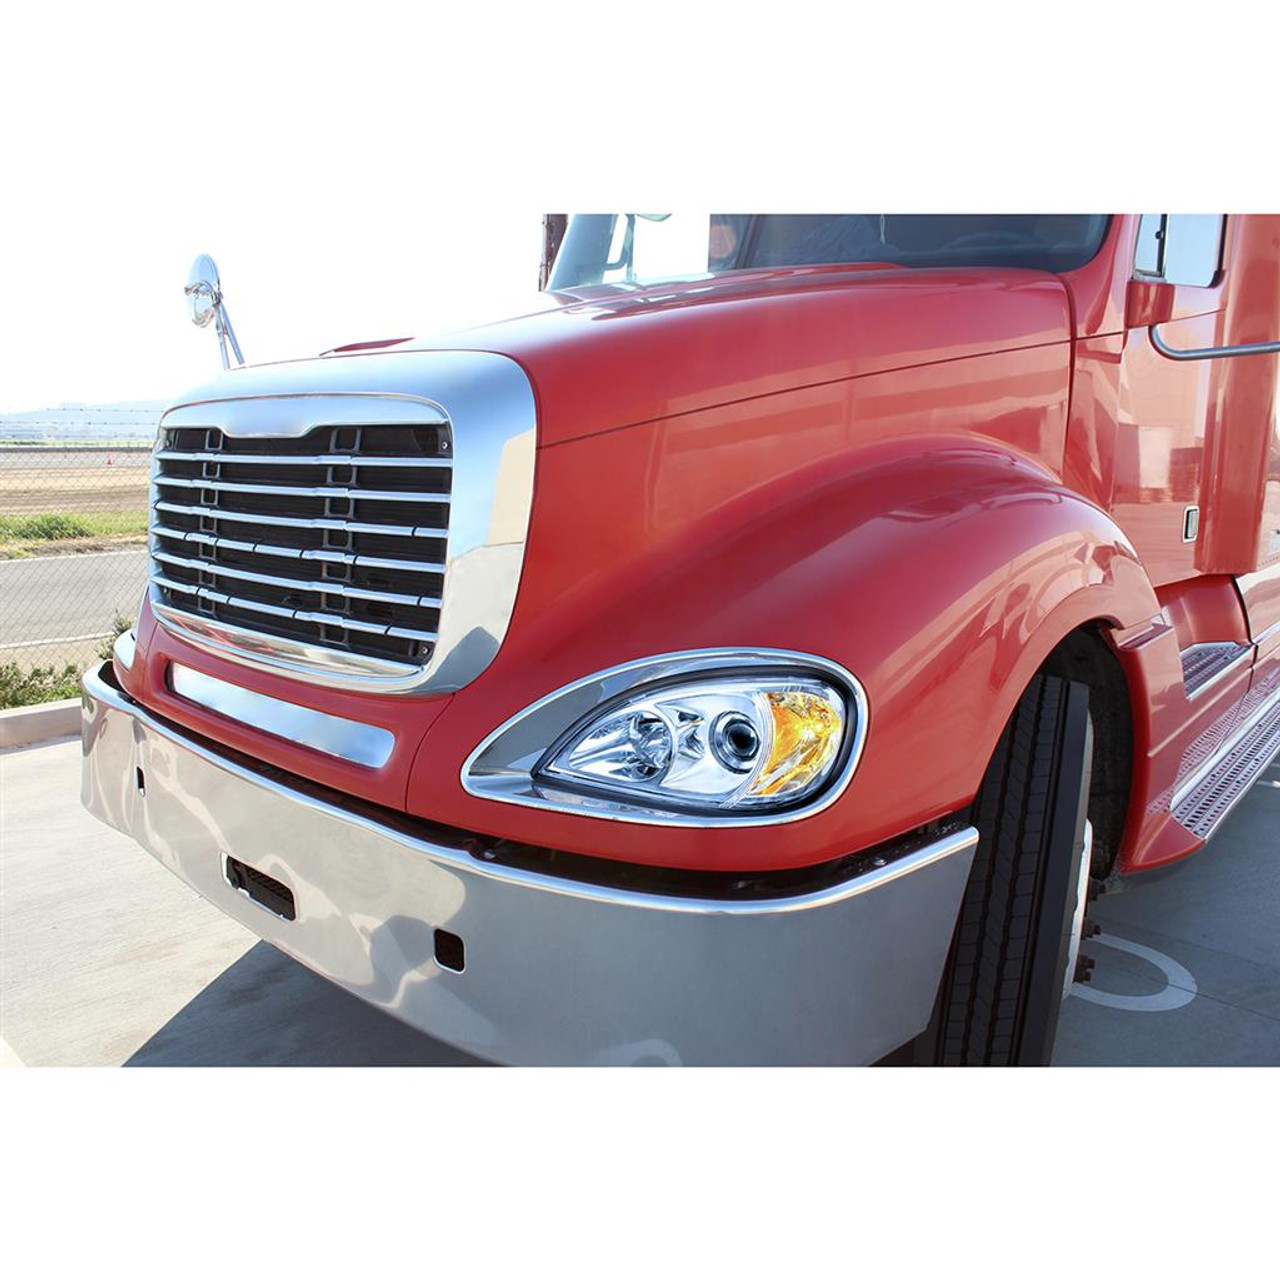 Freightliner Columbia Chrome Projection Headlight - Pair